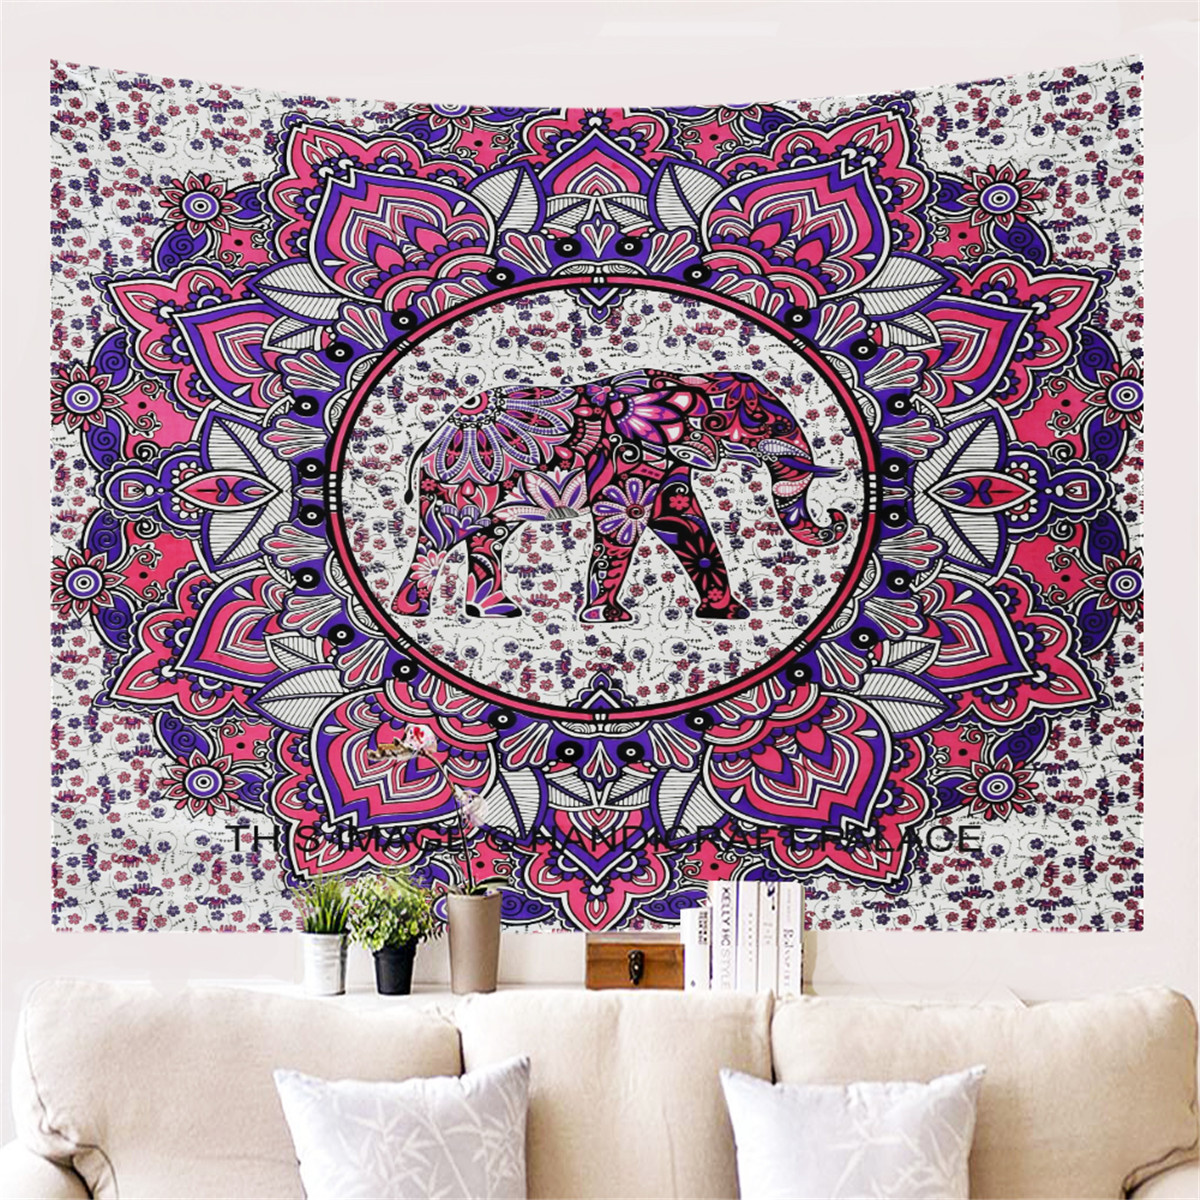 Colorful-Dye-Elephant-Tapestry-Wall-Hanging-Hippie-Tapestry-Colored-Printed-Decorative-Indian-Tapest-1751738-10